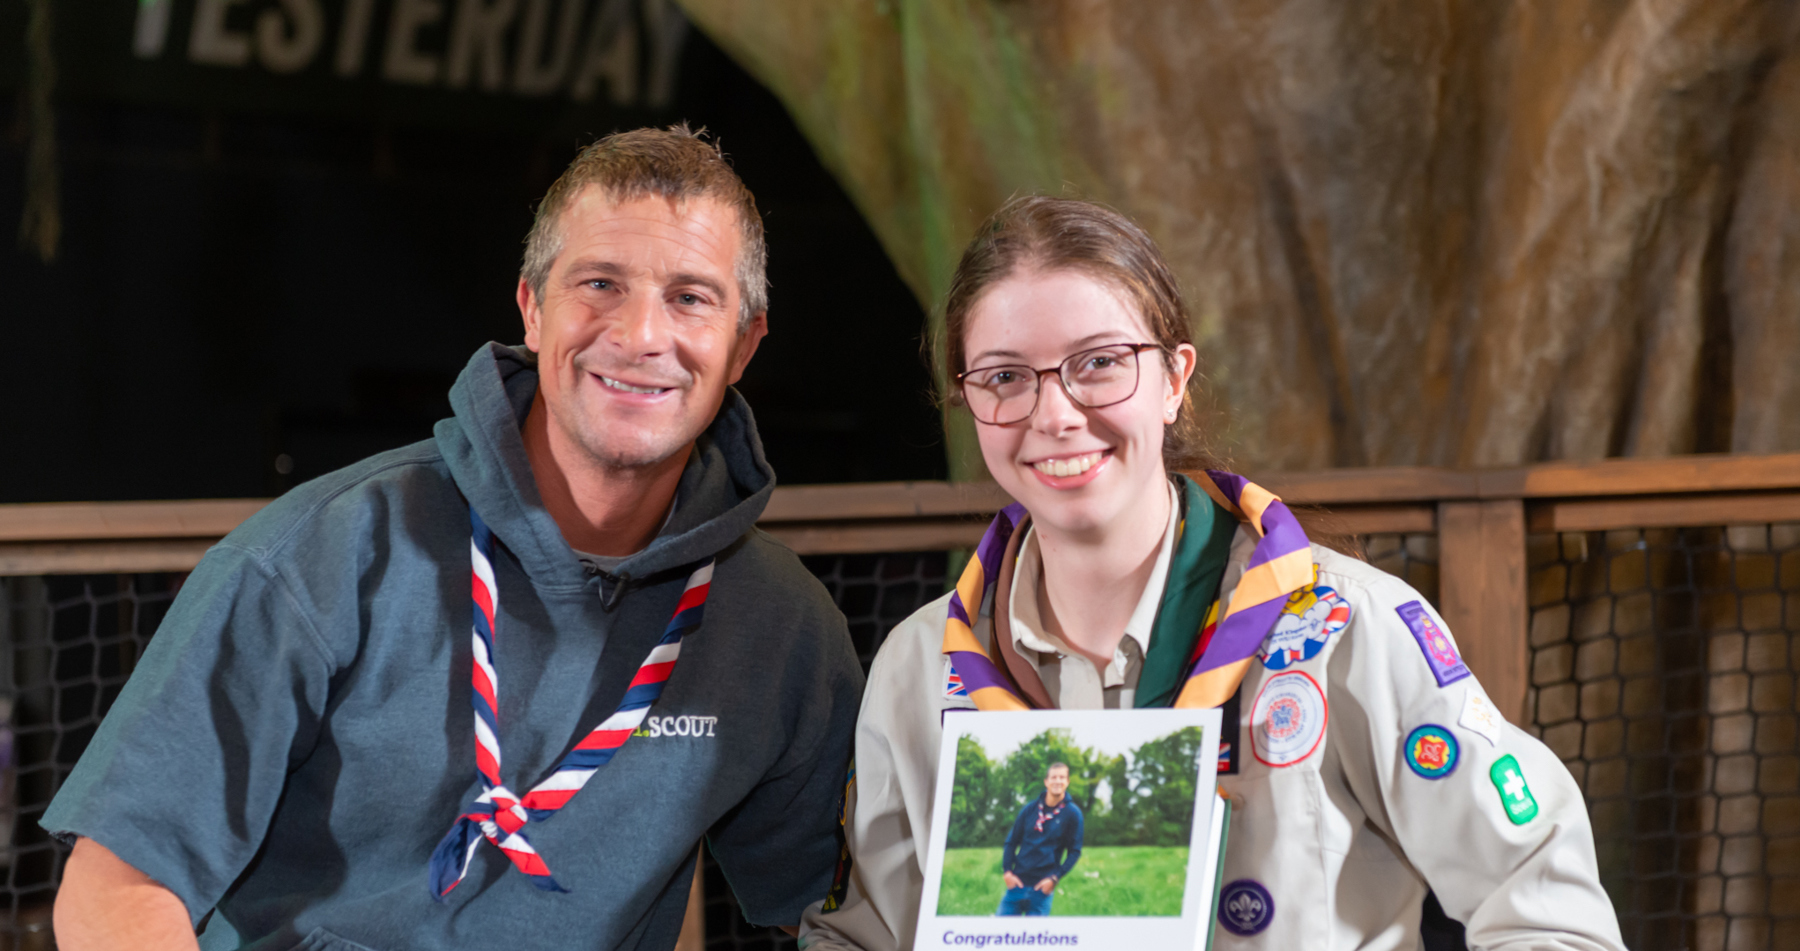 Chief Scout Bear Grylls is pictured with Unsung Hero award recipient Georgie. Bear is wearing a red, white and navy necker, and Georgie is stood to his right, wearing a purple and orange necker. Georgie's holding a certificate in her left hand. 